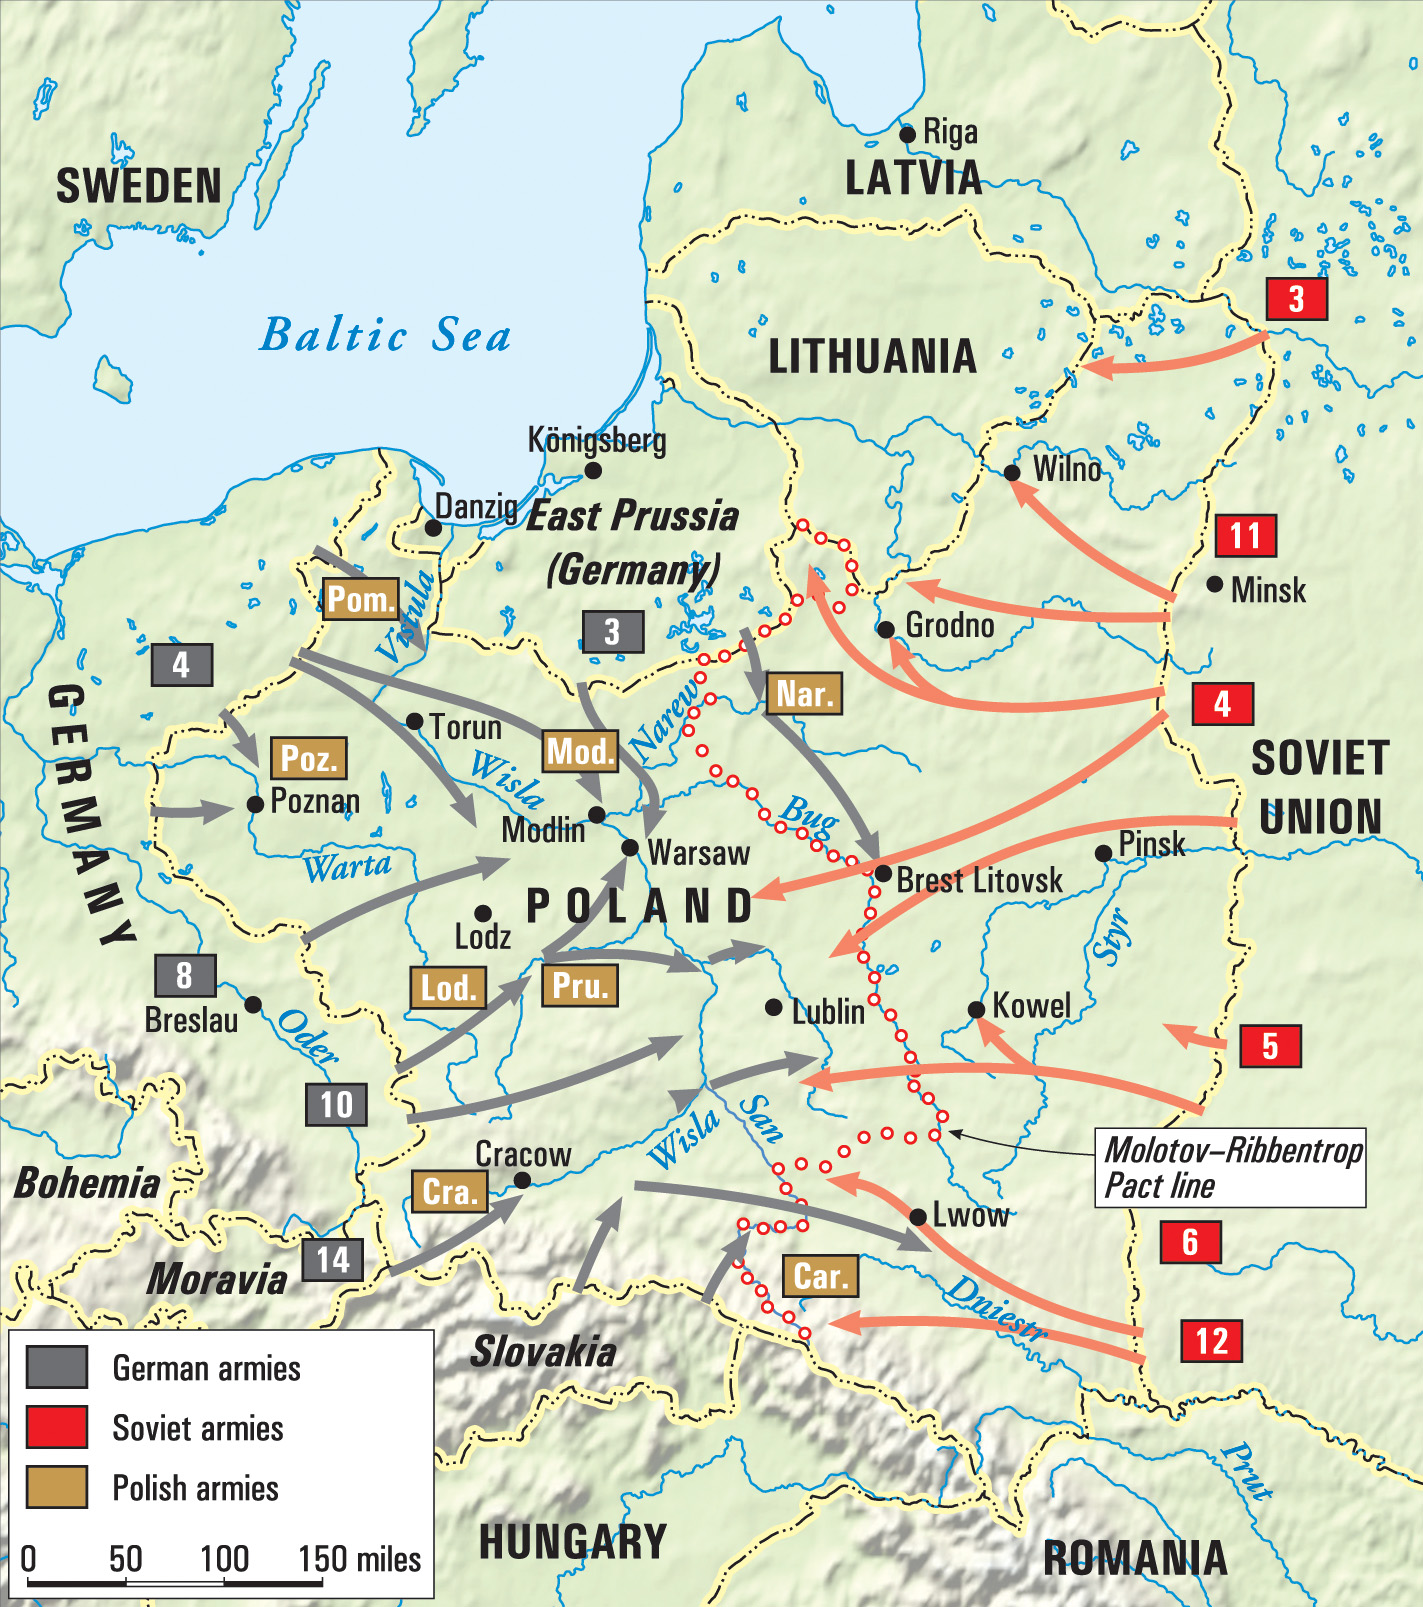 In a previously agreed progression of events, the German Army invaded Poland from the west on September 1, 1939, and the Soviet Red Army then invaded from the east just days later. Poland ceased to exist as a nation. 